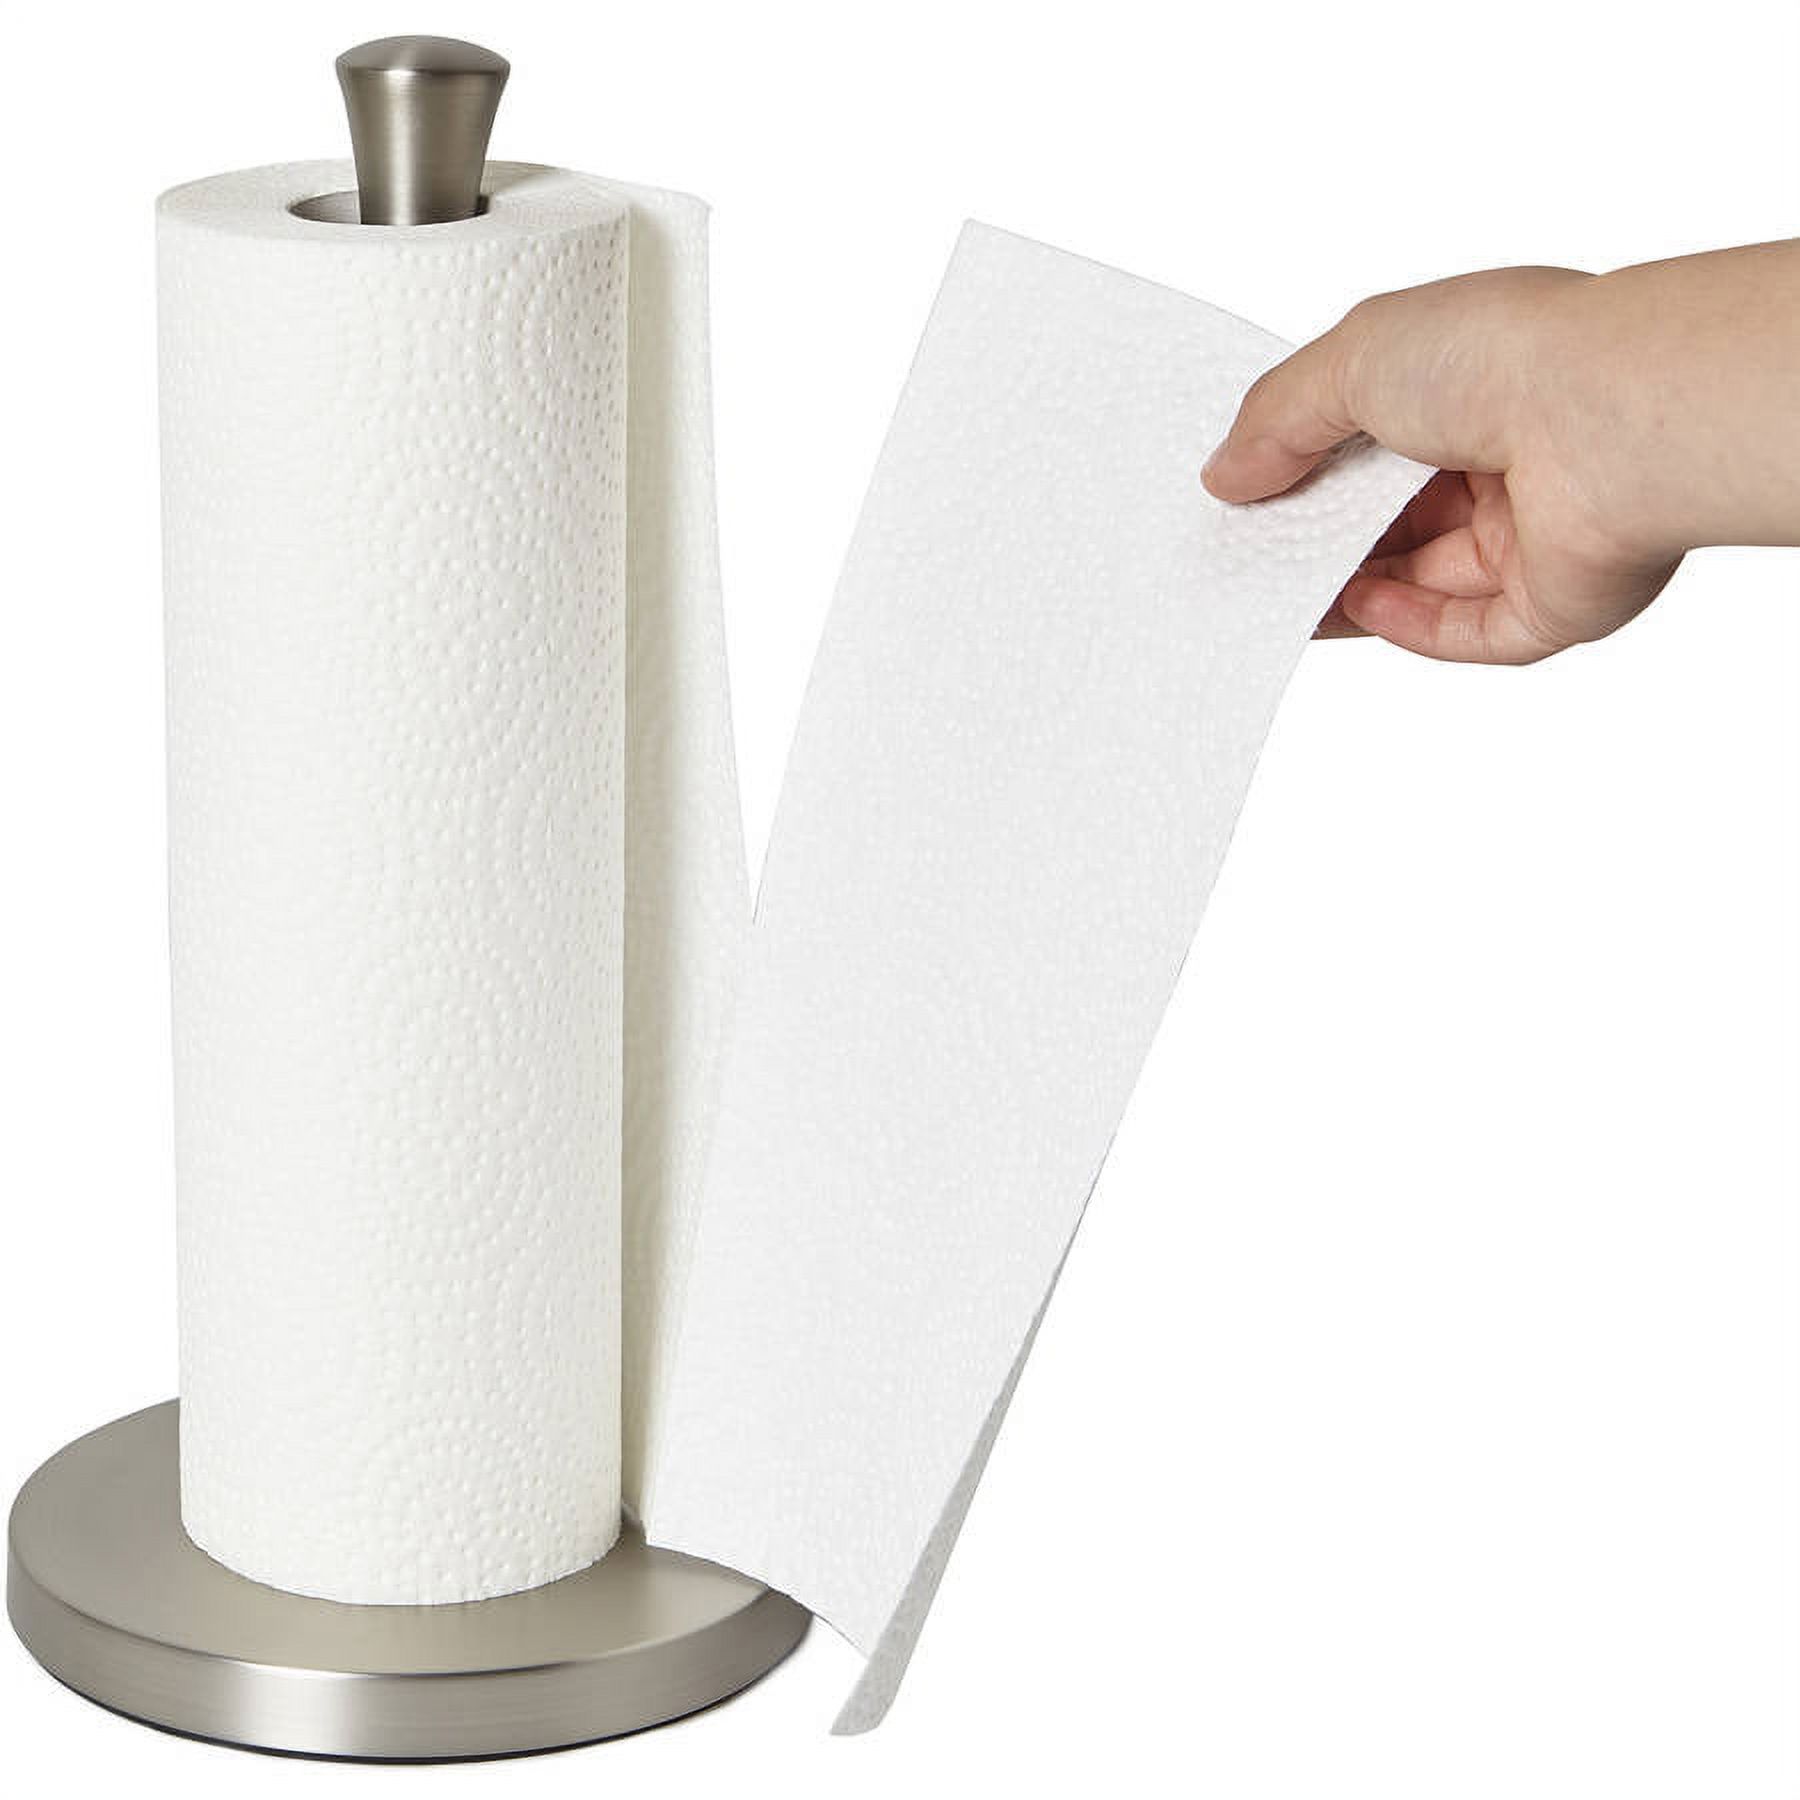 Better Homes & Gardens Free-Standing Paper Towel Holder with Weighted Non-Slip Base, 14 Inch, Nickel - image 2 of 7